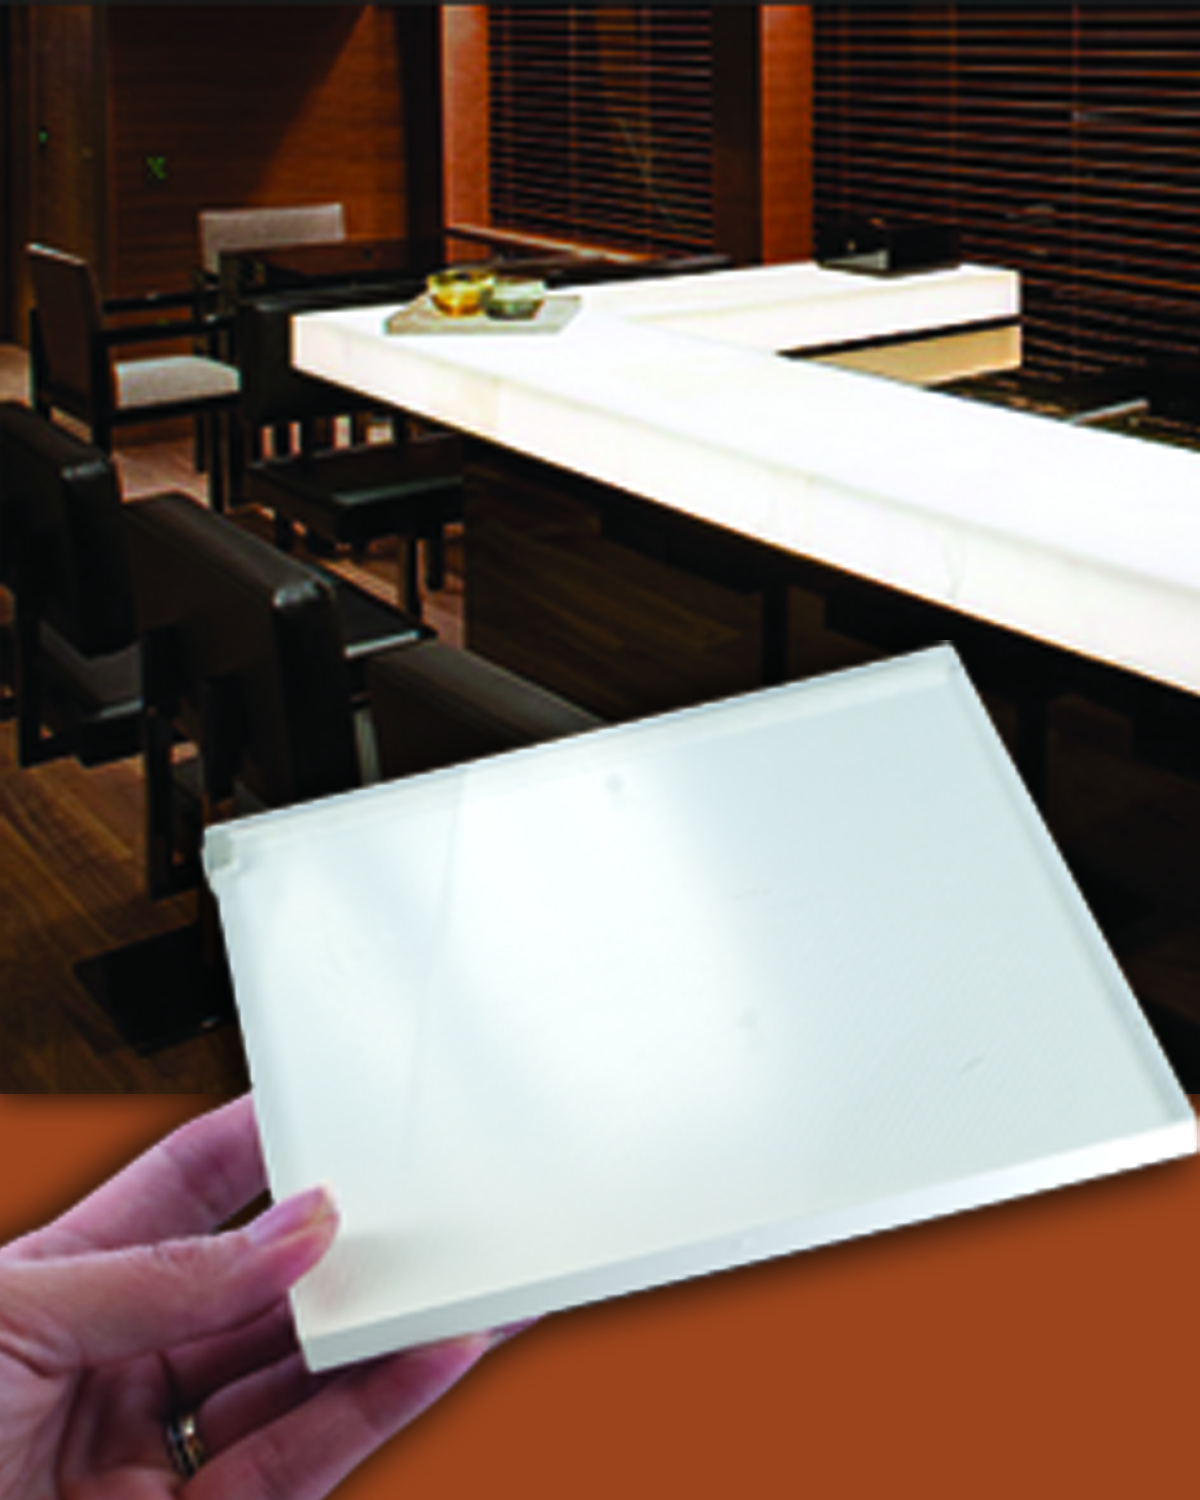 Outwater’s Tri-Mod and Nova Sheet LED Backlighting Systems